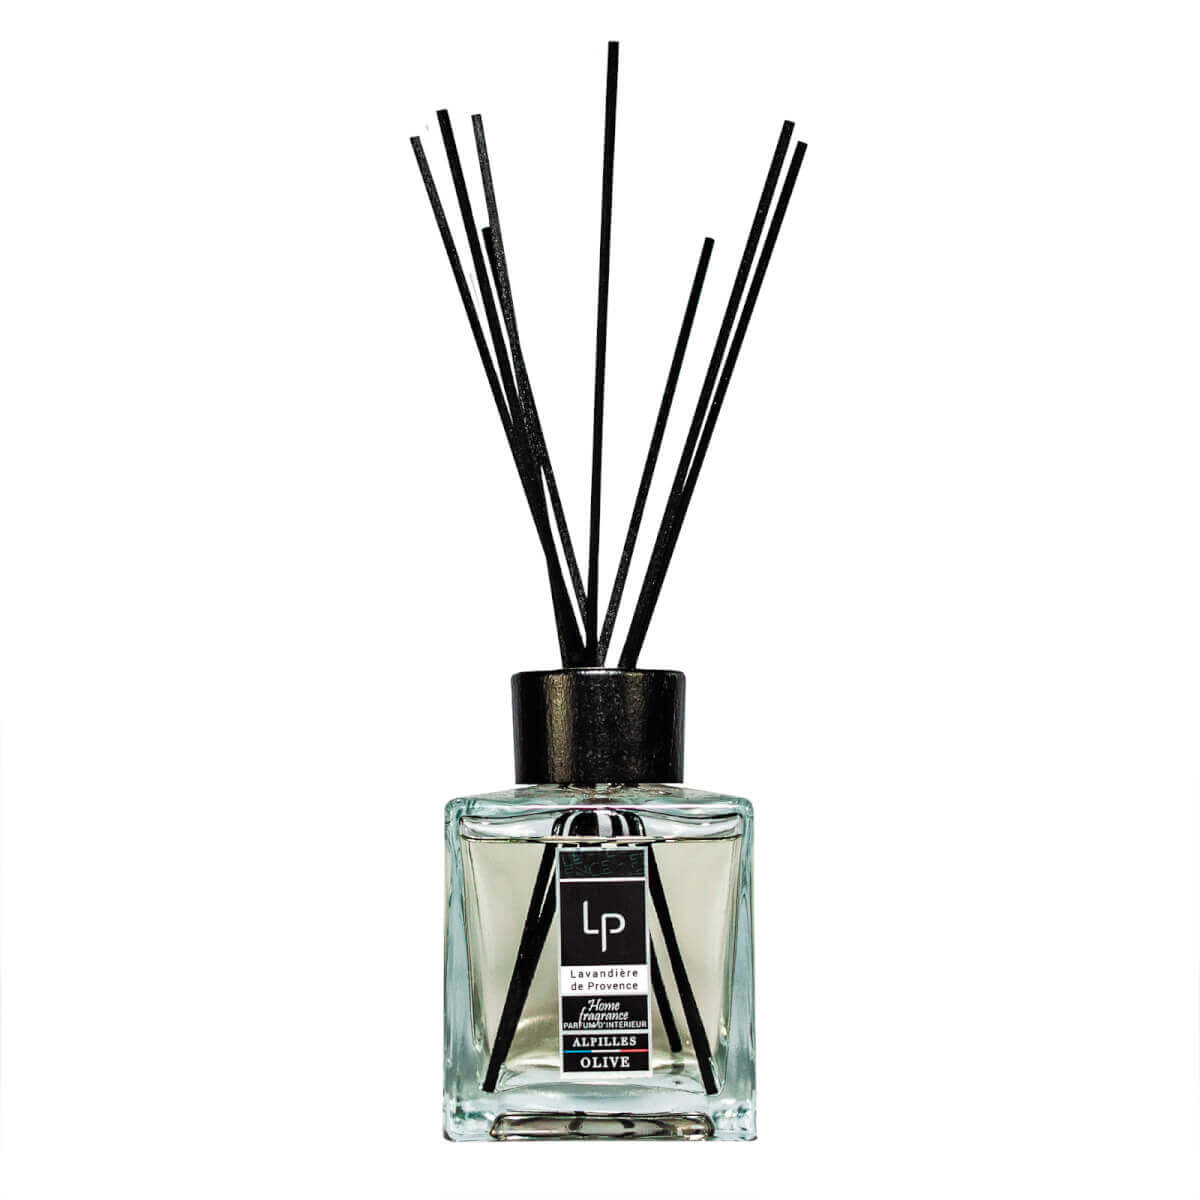 Home fragrance diffuser scented with olive wood